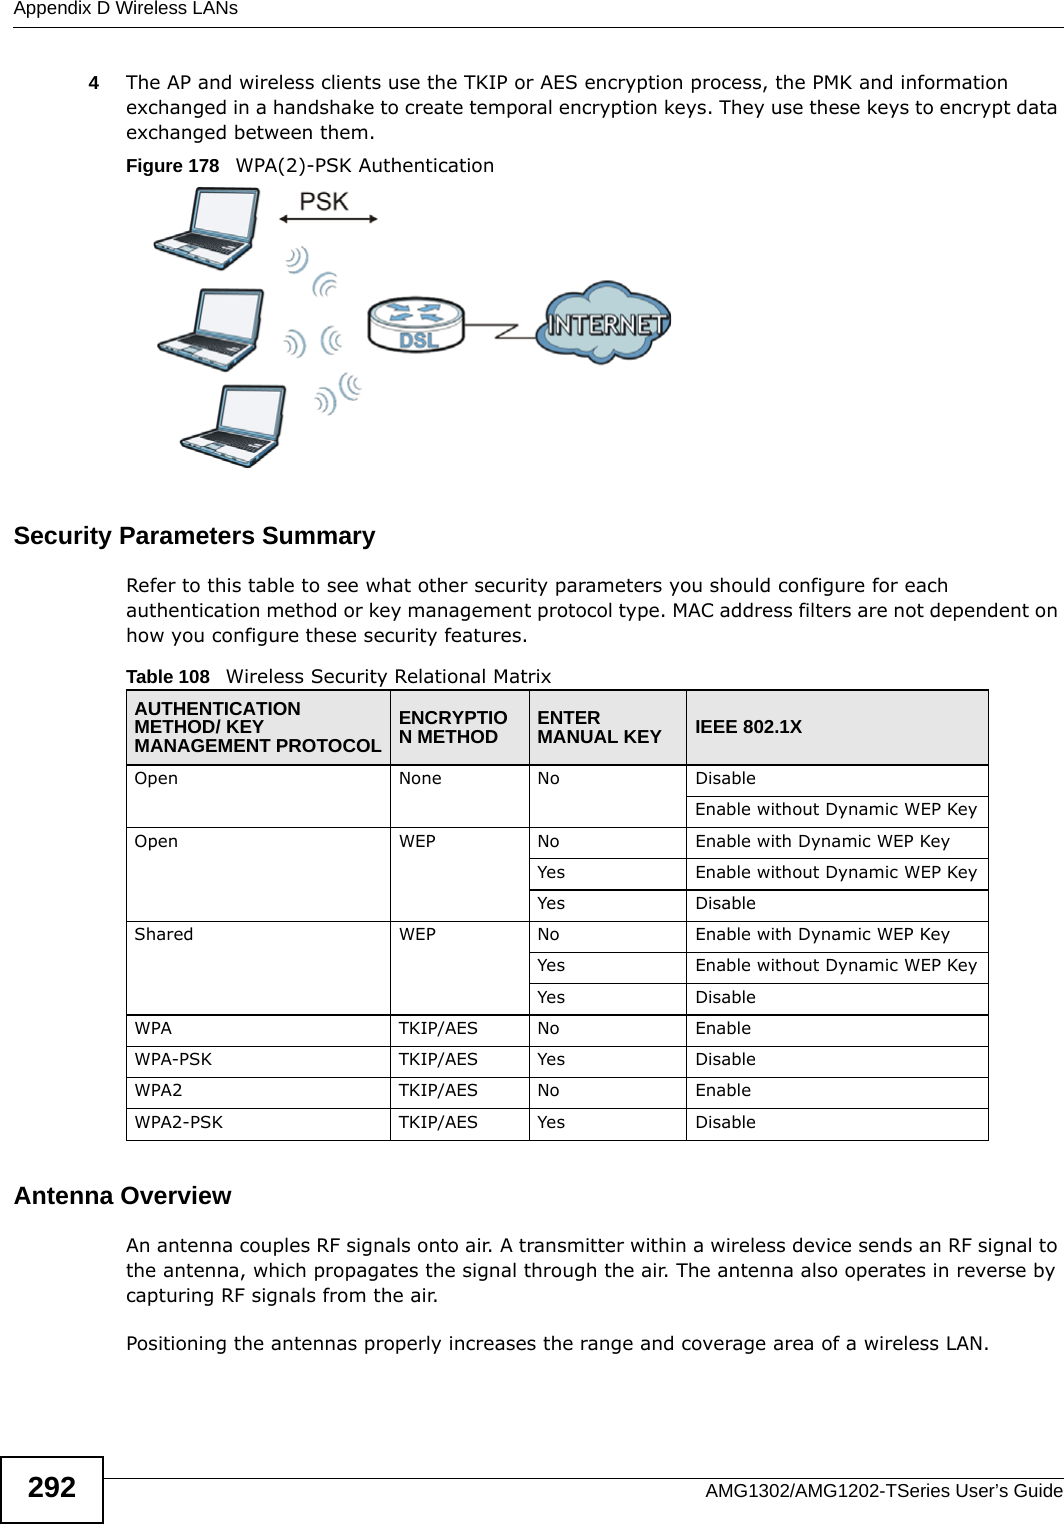 Appendix D Wireless LANsAMG1302/AMG1202-TSeries User’s Guide2924The AP and wireless clients use the TKIP or AES encryption process, the PMK and information exchanged in a handshake to create temporal encryption keys. They use these keys to encrypt data exchanged between them.Figure 178   WPA(2)-PSK AuthenticationSecurity Parameters SummaryRefer to this table to see what other security parameters you should configure for each authentication method or key management protocol type. MAC address filters are not dependent on how you configure these security features.Antenna OverviewAn antenna couples RF signals onto air. A transmitter within a wireless device sends an RF signal to the antenna, which propagates the signal through the air. The antenna also operates in reverse by capturing RF signals from the air. Positioning the antennas properly increases the range and coverage area of a wireless LAN. Table 108   Wireless Security Relational MatrixAUTHENTICATION METHOD/ KEY MANAGEMENT PROTOCOLENCRYPTION METHOD ENTER MANUAL KEY IEEE 802.1XOpen None No DisableEnable without Dynamic WEP KeyOpen WEP No           Enable with Dynamic WEP KeyYes Enable without Dynamic WEP KeyYes DisableShared WEP  No           Enable with Dynamic WEP KeyYes Enable without Dynamic WEP KeyYes DisableWPA  TKIP/AES No EnableWPA-PSK  TKIP/AES Yes DisableWPA2 TKIP/AES No EnableWPA2-PSK  TKIP/AES Yes Disable